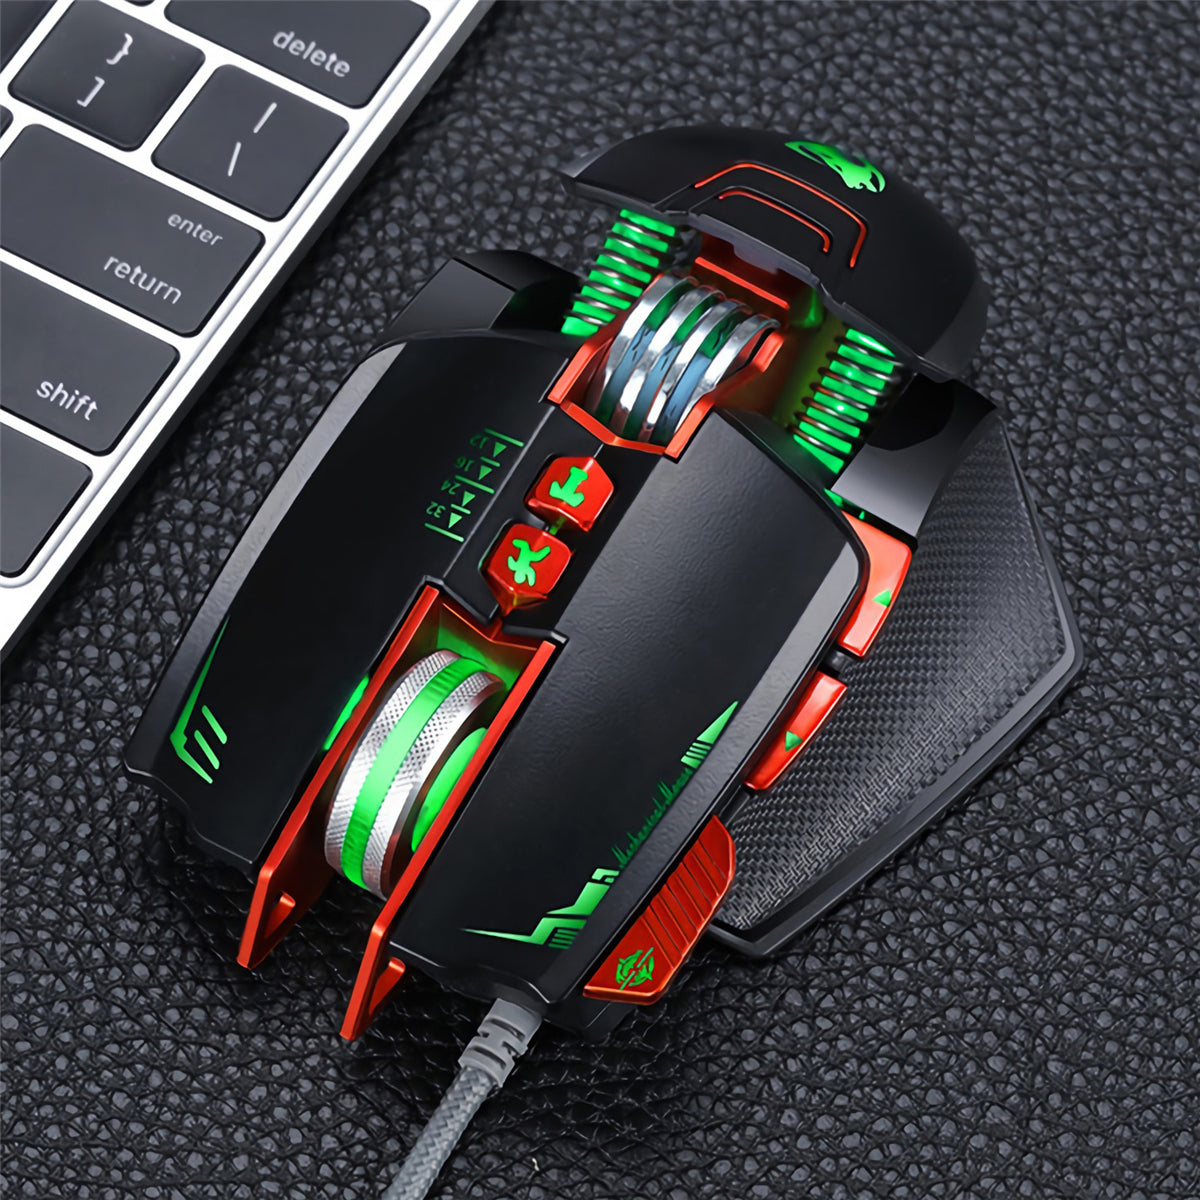 T-WOLF V9 Wired Gaming Mouse 3200DPI 8 Programmable Buttons Breathing Backlight Home Office Mechanical Mouse for Computer Laptop PC Gamer